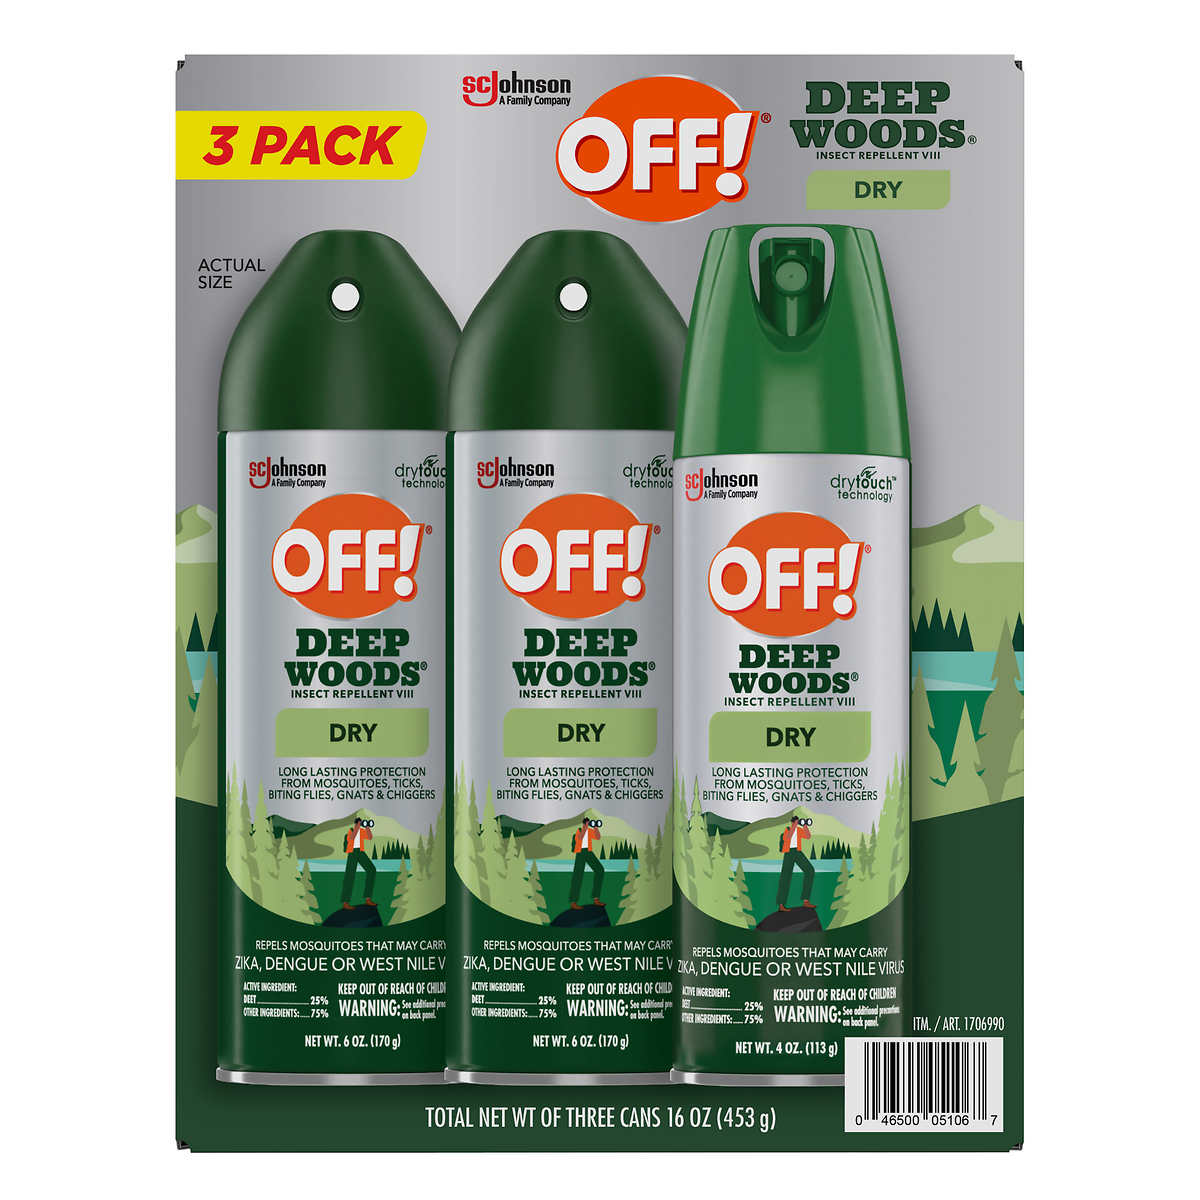 OFF! Deep Woods Dry Insect Repellent Set